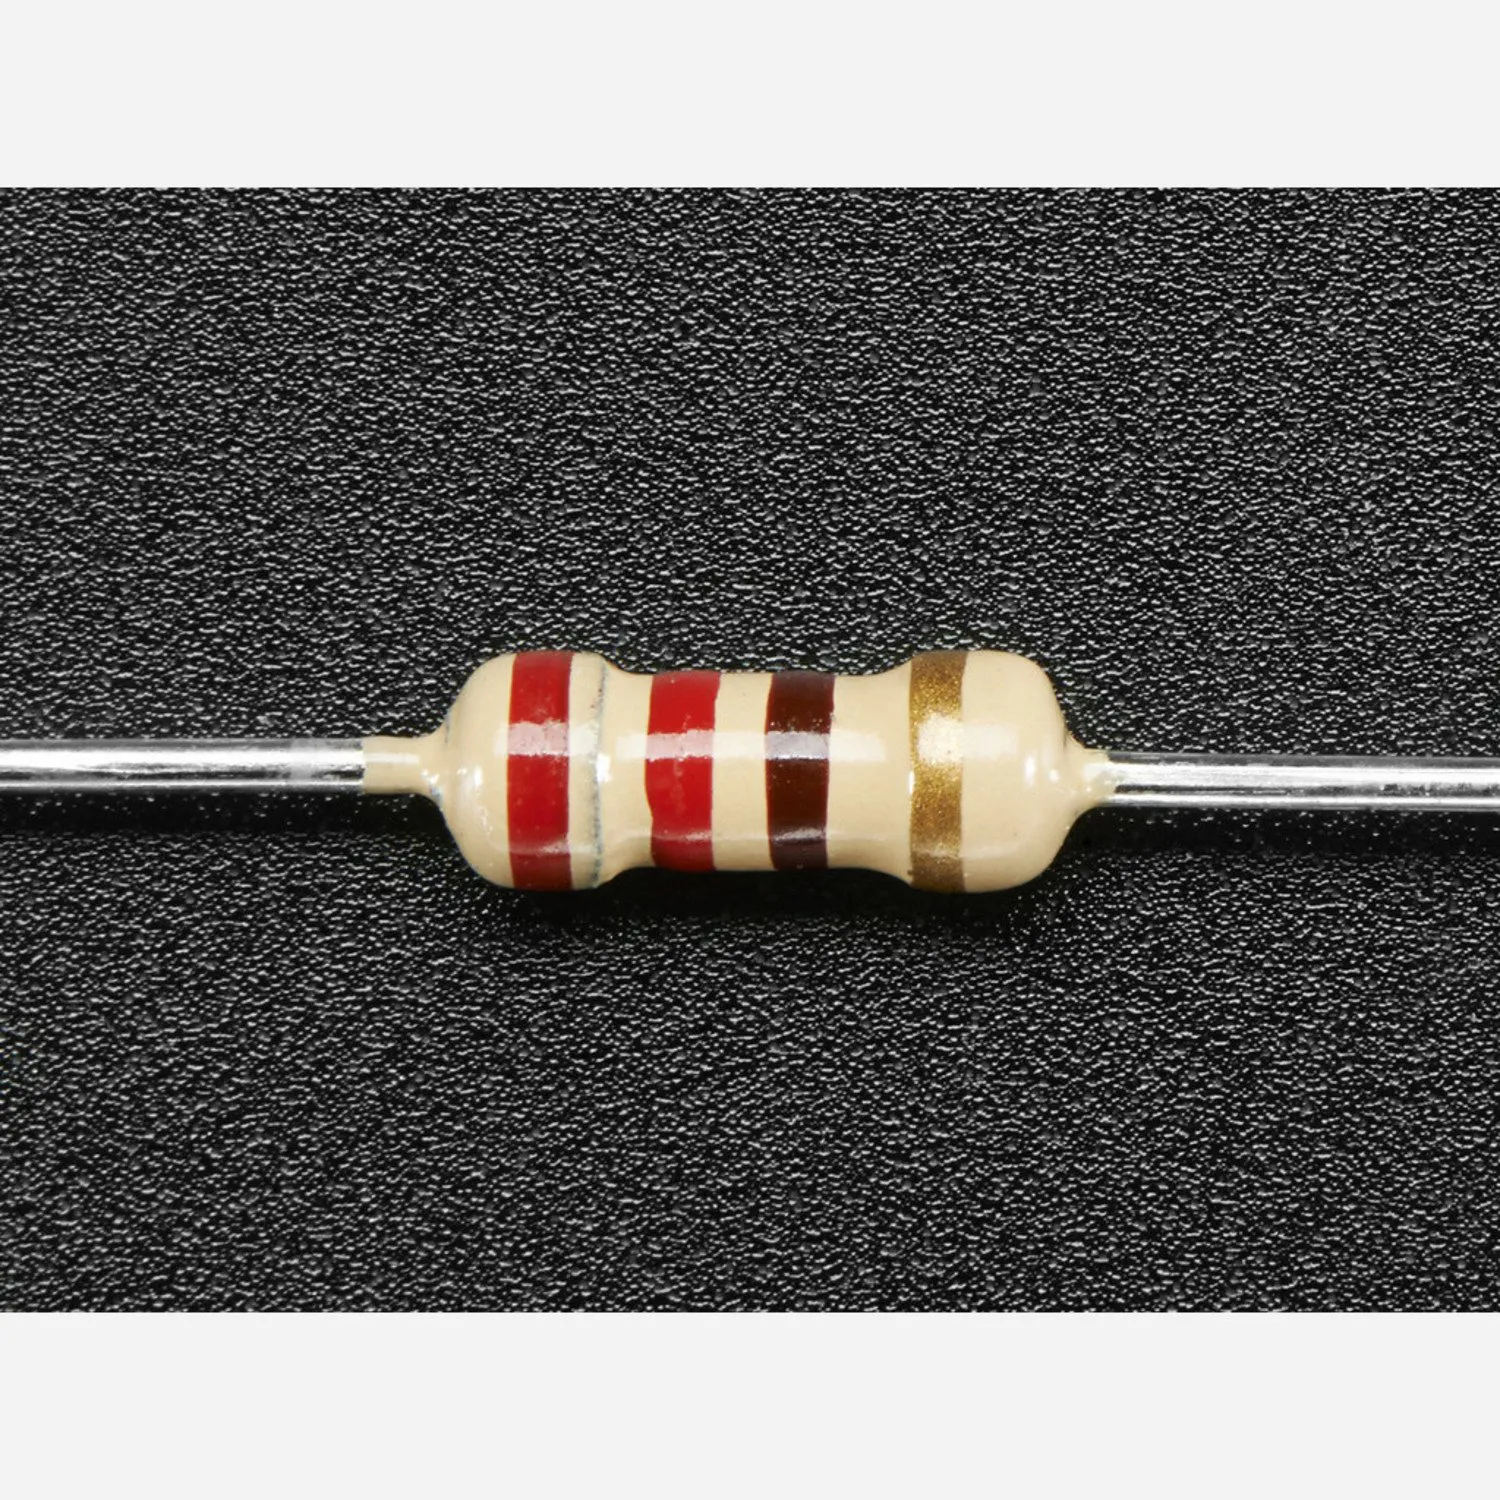 Photo of Through-Hole Resistors - 220 ohm 5% 1/4W - Pack of 25